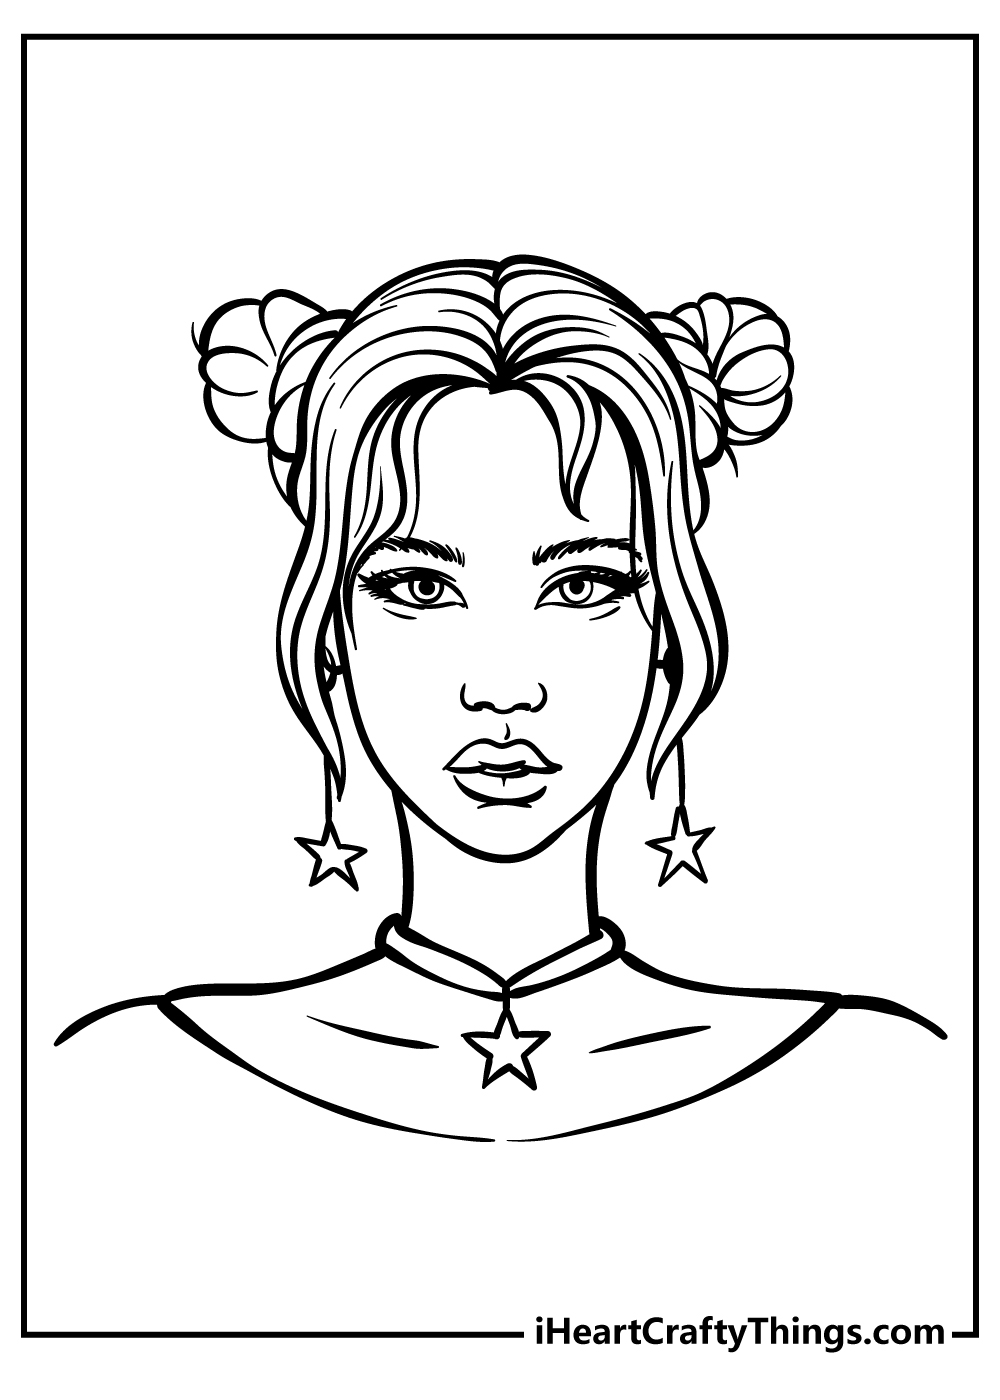 Coloring Pages For Teens free pdf download